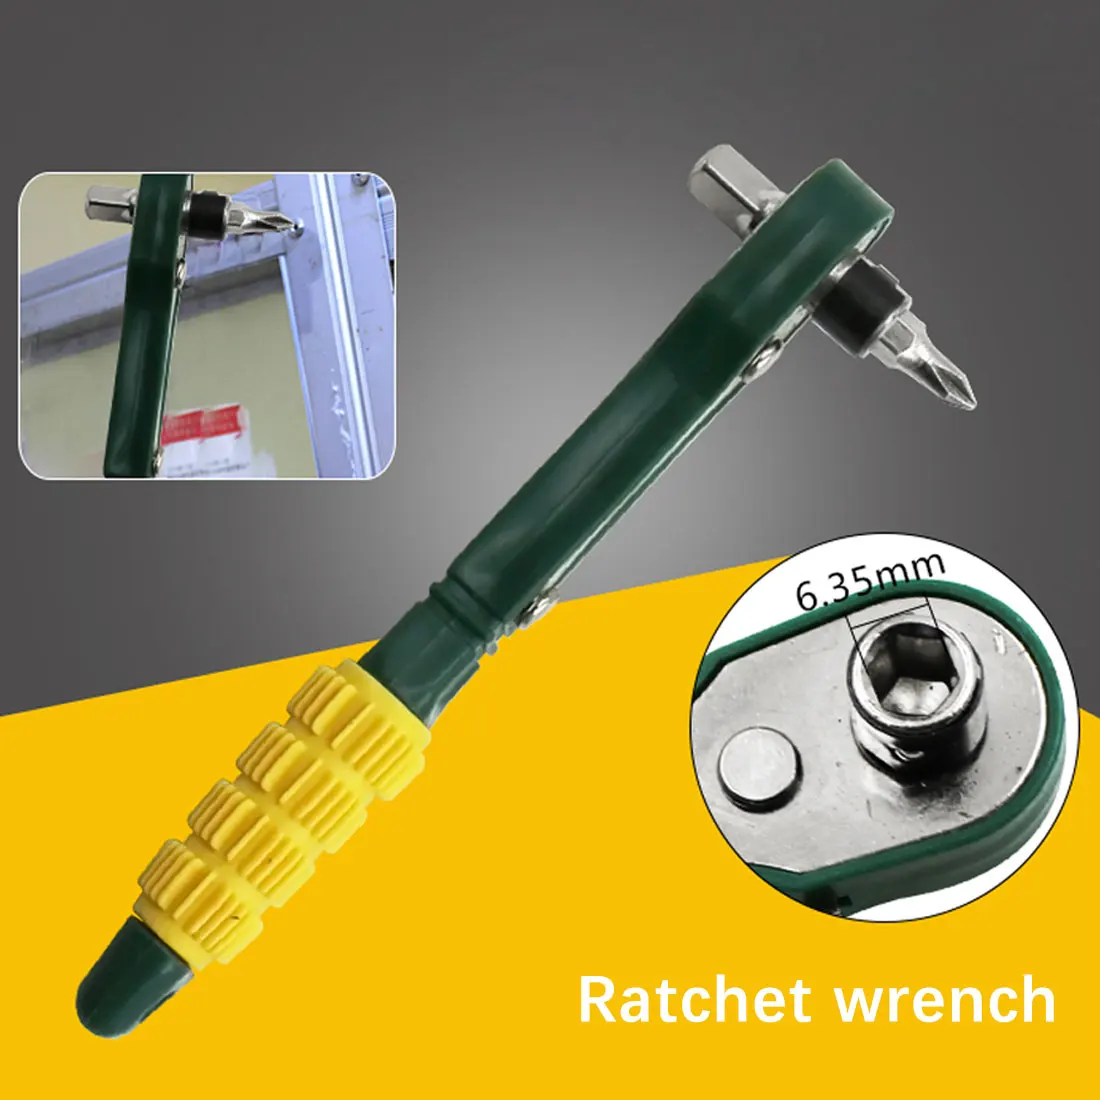 

1/4" 6.35mm Mini Rapid Ratchet Wrench Screwdriver Rod Quick Socket Tools Yellow Green Adjustable Span Release Easy